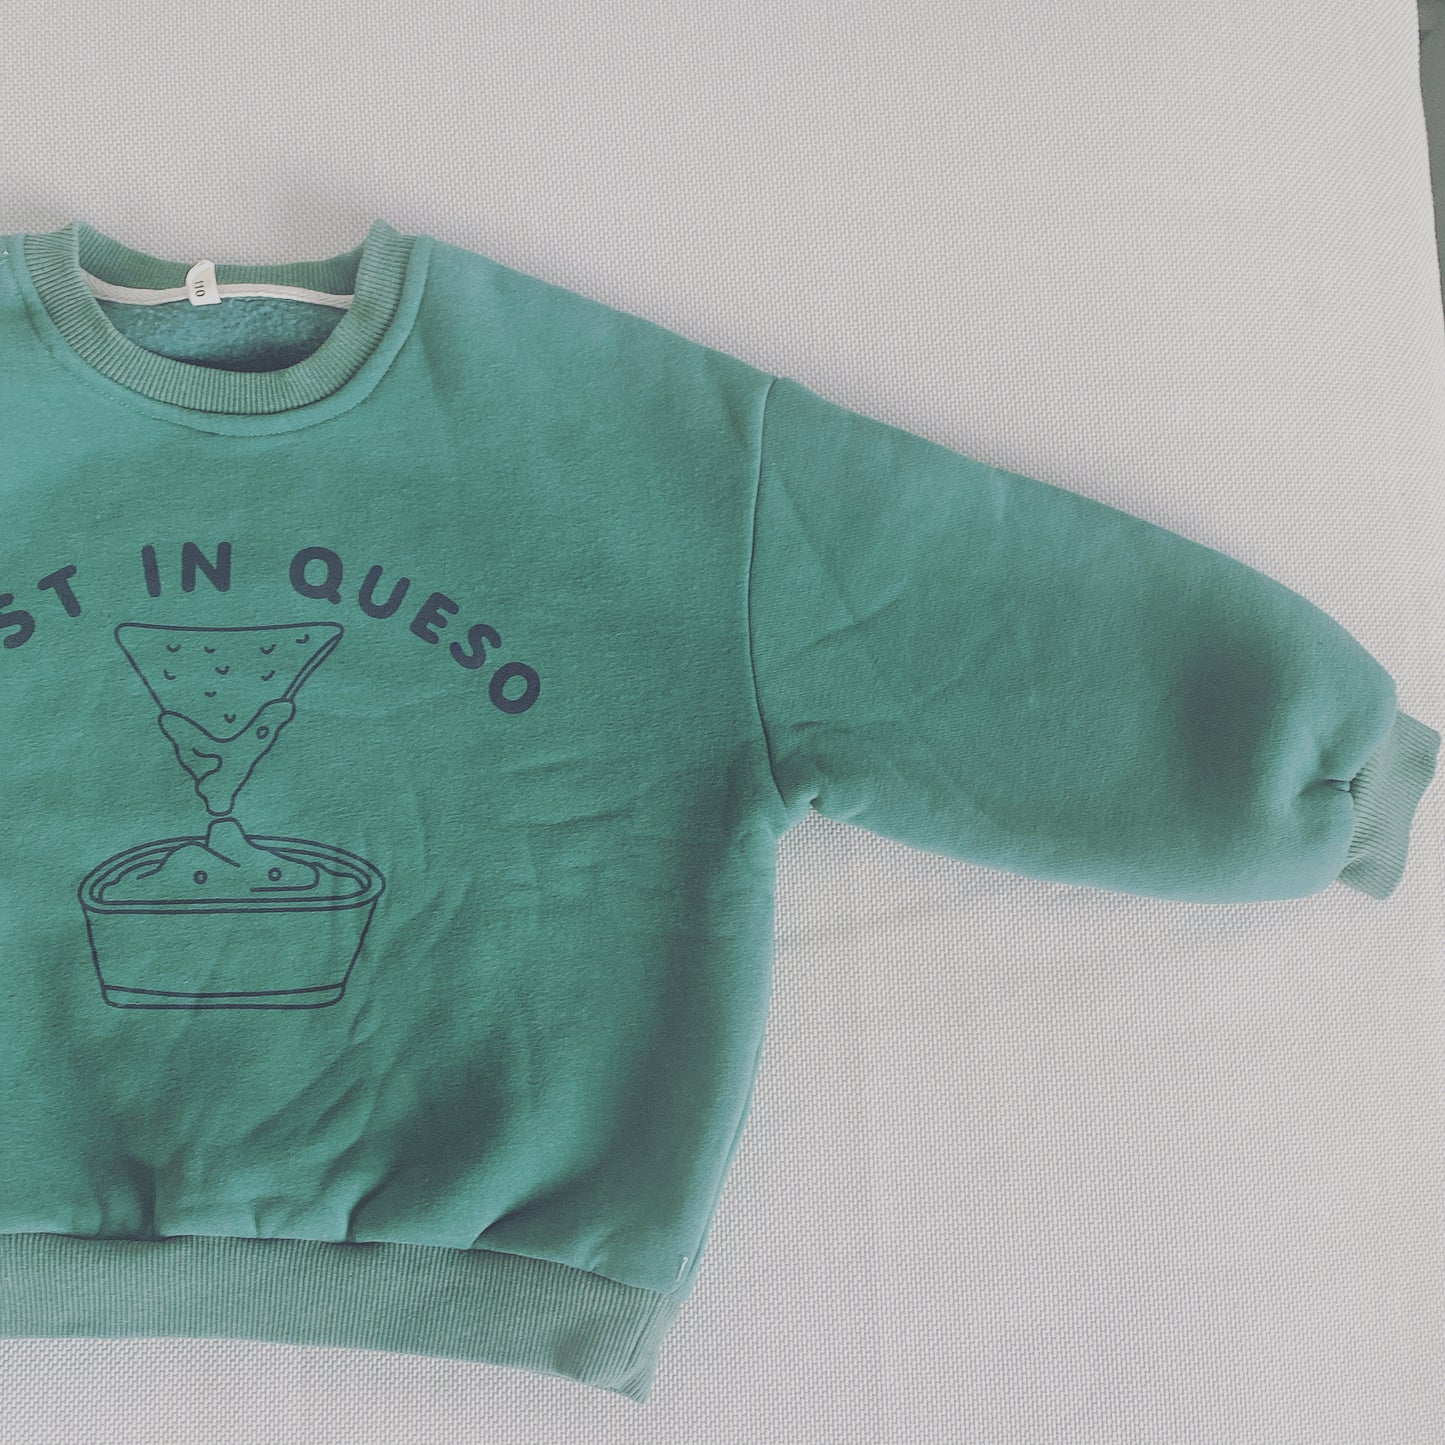 queso pullover / beige